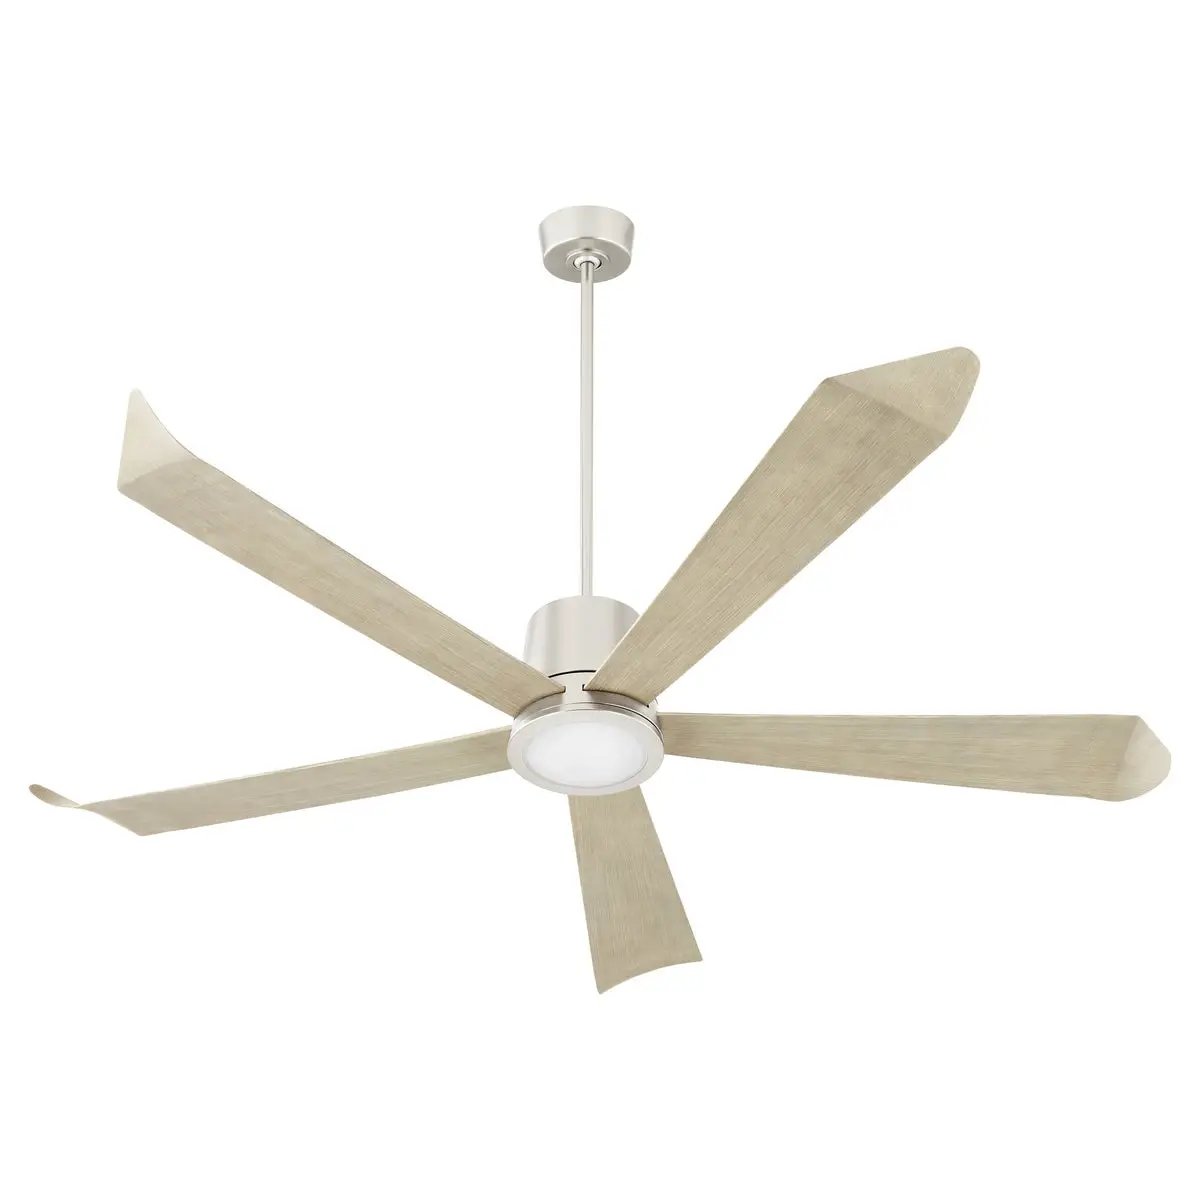 A smart ceiling fan with elongated blades and optional light kits. Perfect for elevating any living space. Brand: Quorum International.